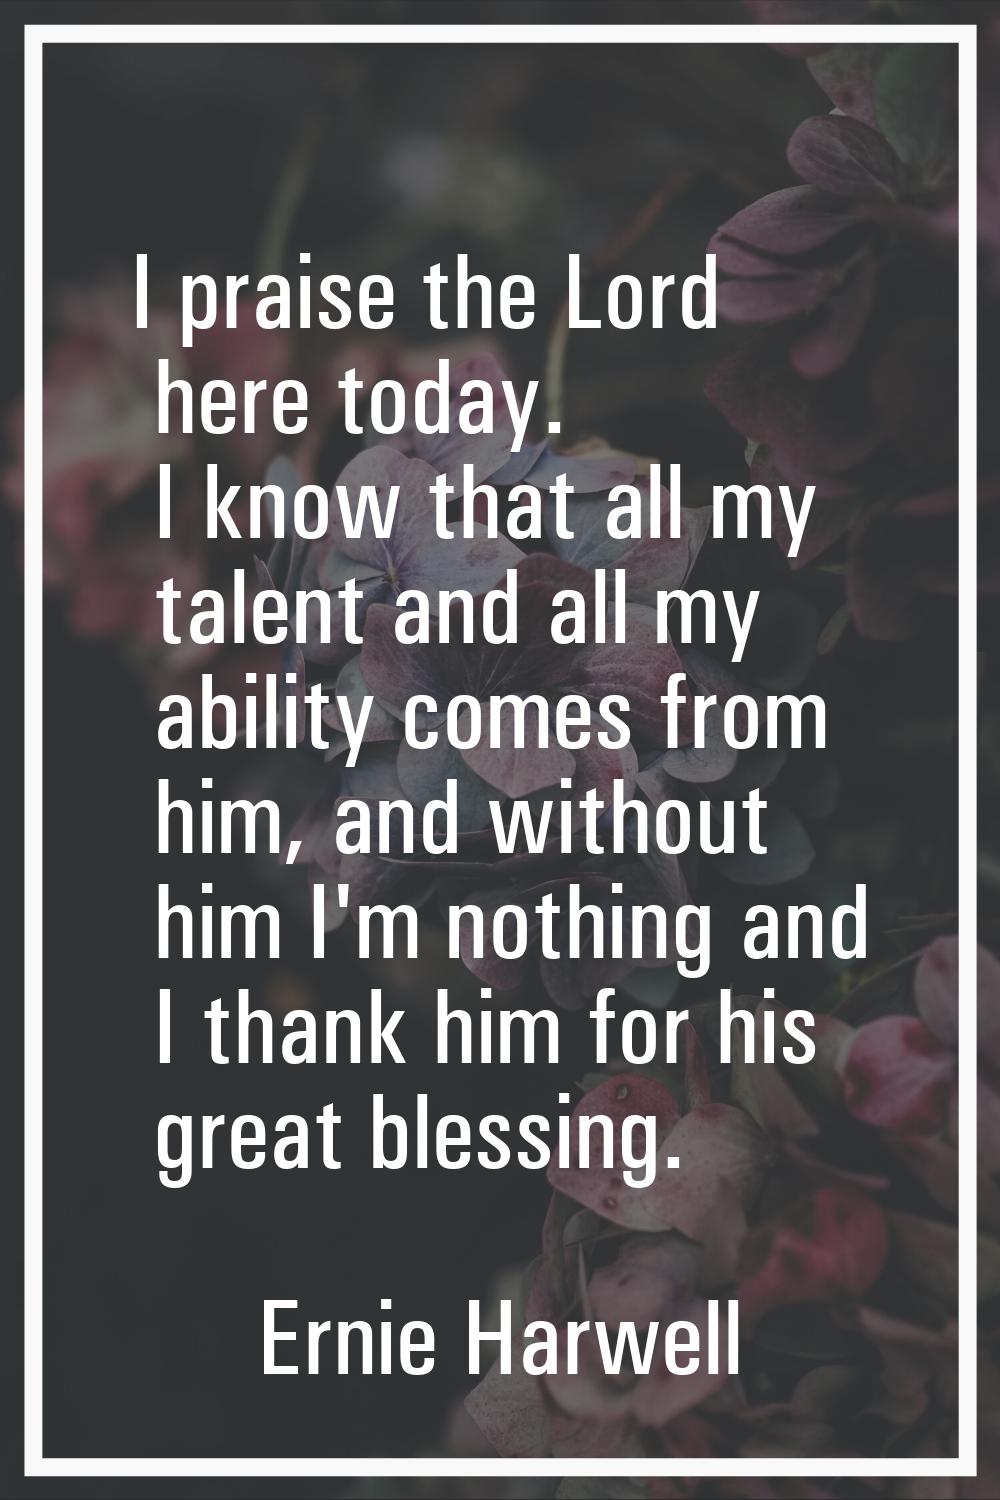 I praise the Lord here today. I know that all my talent and all my ability comes from him, and with